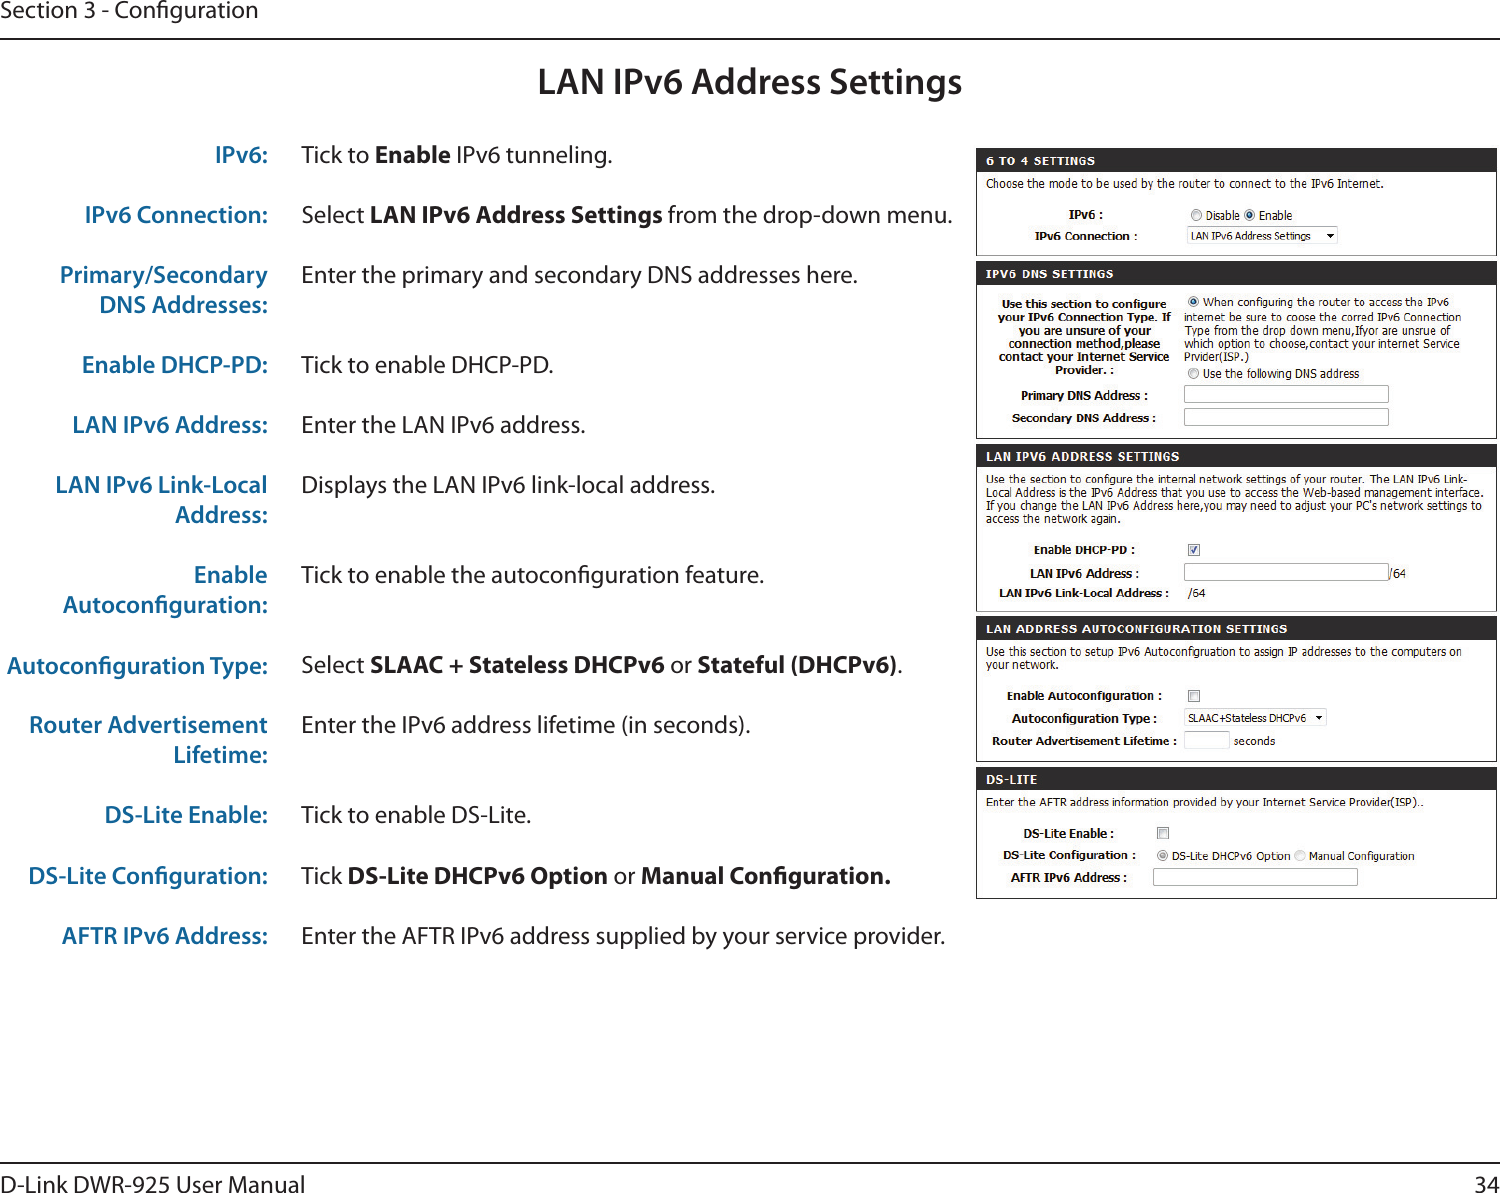 34D-Link DWR-925 User ManualSection 3 - CongurationLAN IPv6 Address SettingsTick to Enable IPv6 tunneling.Select LAN IPv6 Address Settings from the drop-down menu.Enter the primary and secondary DNS addresses here.Tick to enable DHCP-PD.Enter the LAN IPv6 address.Displays the LAN IPv6 link-local address.Tick to enable the autoconguration feature.Select SLAAC + Stateless DHCPv6 or Stateful (DHCPv6).Enter the IPv6 address lifetime (in seconds).Tick to enable DS-Lite.Tick DS-Lite DHCPv6 Option or Manual Conguration.Enter the AFTR IPv6 address supplied by your service provider.IPv6:IPv6 Connection:Primary/Secondary DNS Addresses:Enable DHCP-PD:LAN IPv6 Address:LAN IPv6 Link-Local Address:Enable Autoconguration:Autoconguration Type:Router Advertisement Lifetime:DS-Lite Enable:DS-Lite Conguration:AFTR IPv6 Address: